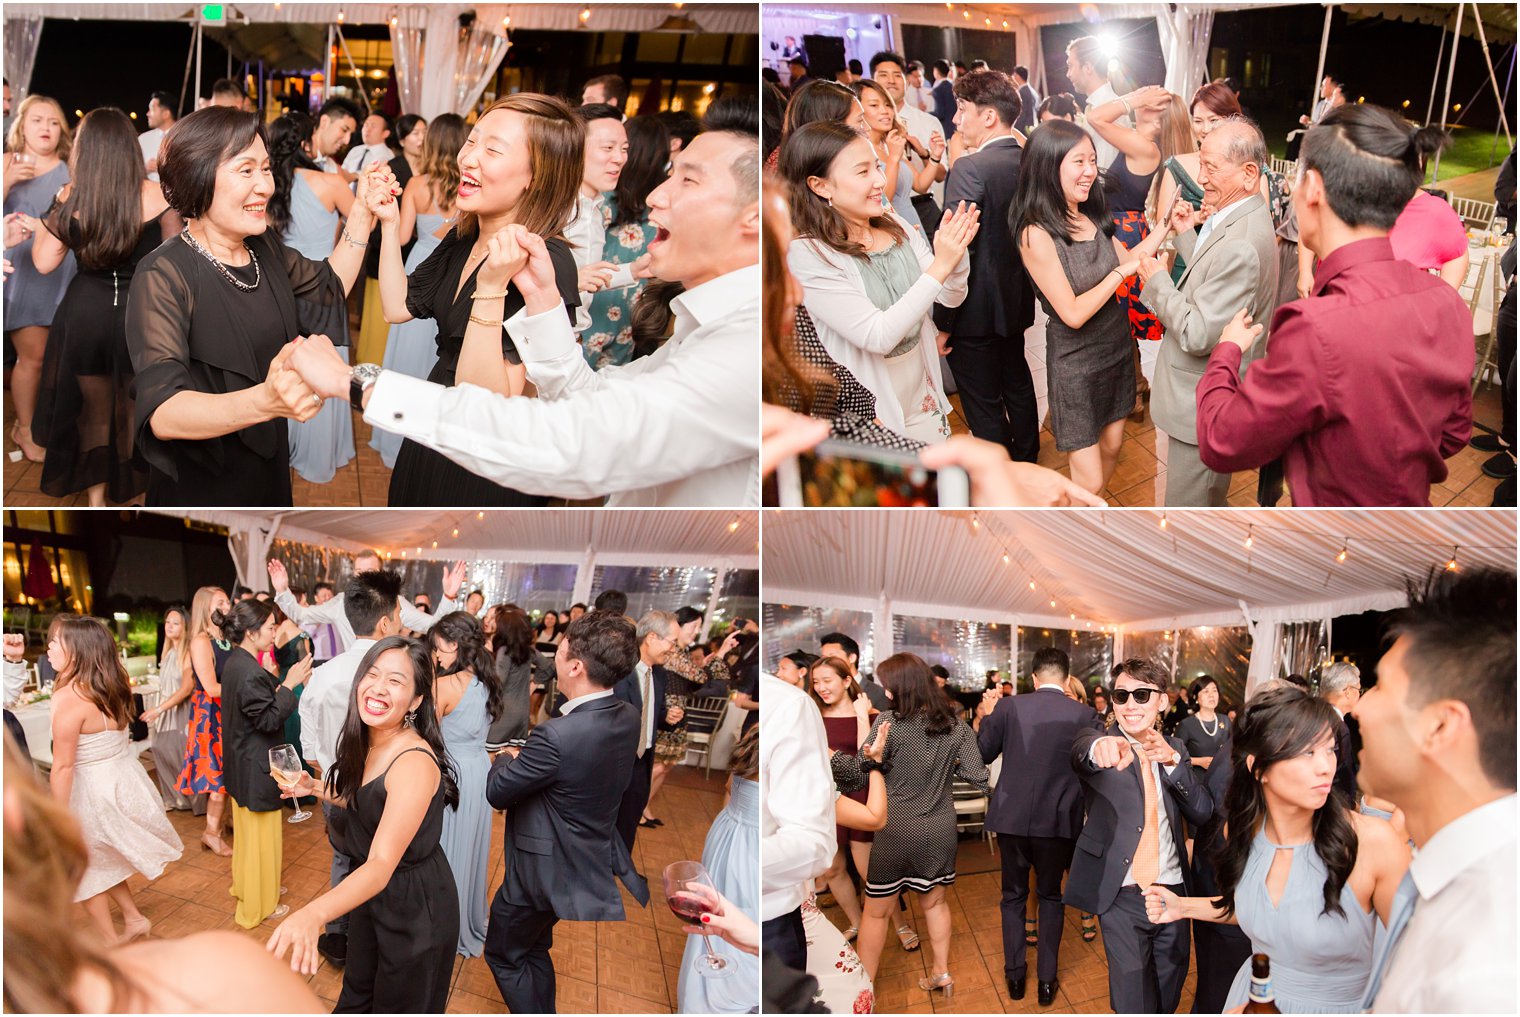 dancing at New Jersey wedding reception photographed by Idalia Photography